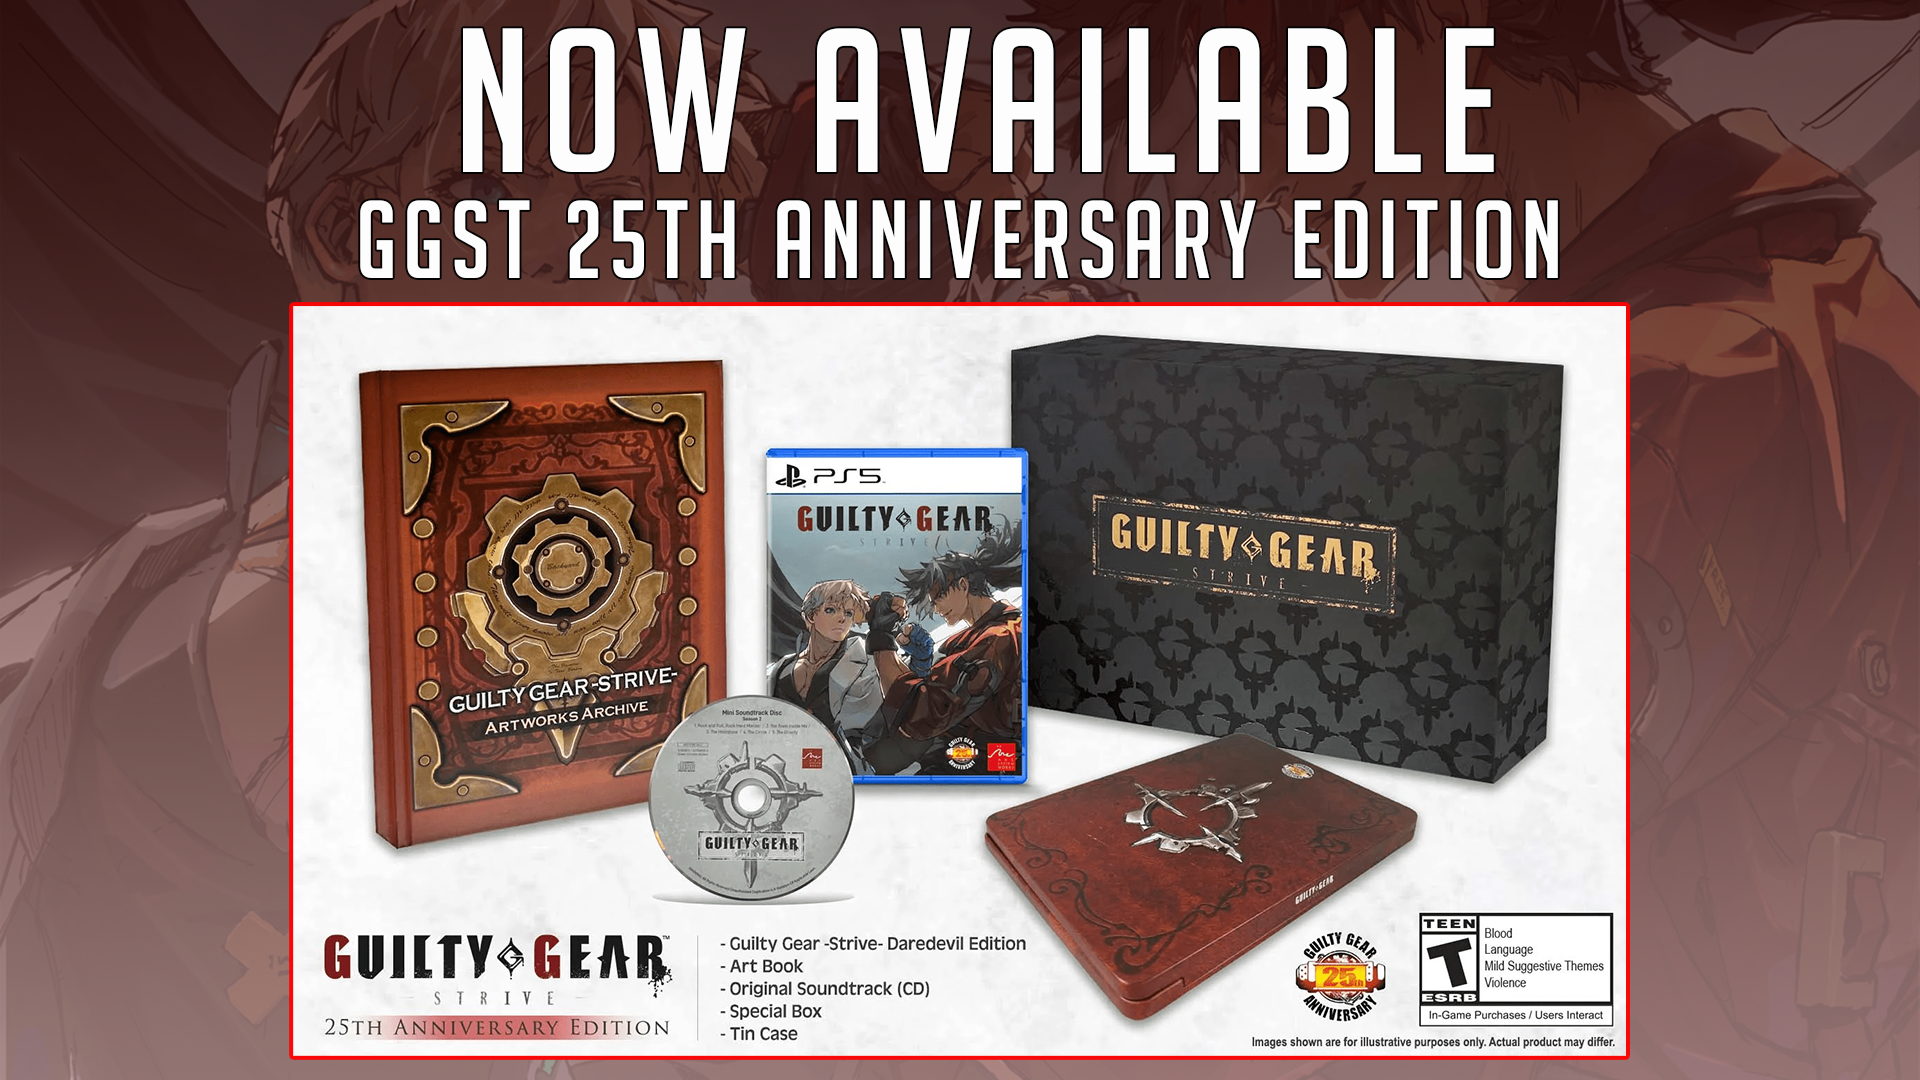 Guilty Gear -Strive- GG 25th Anniversary Edition has officially been released